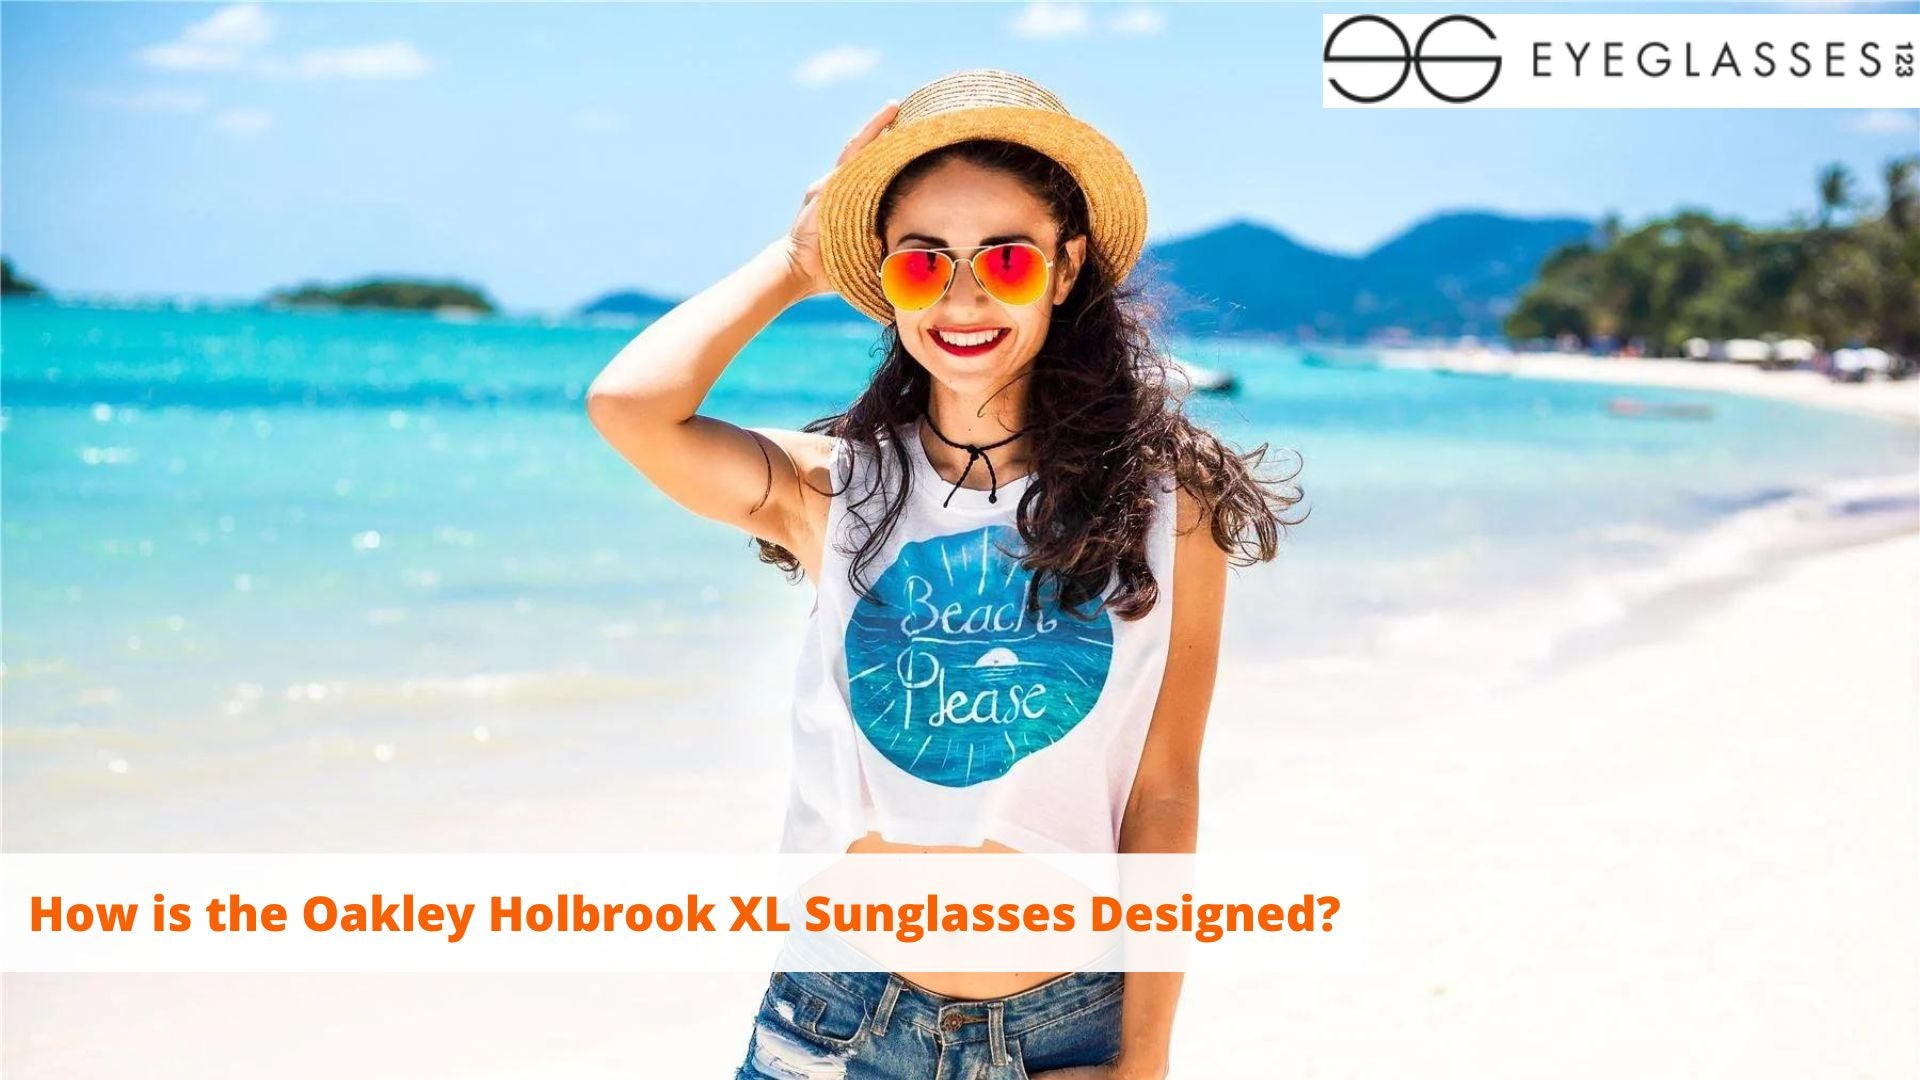 How is the Oakley Holbrook XL Sunglasses Designed?